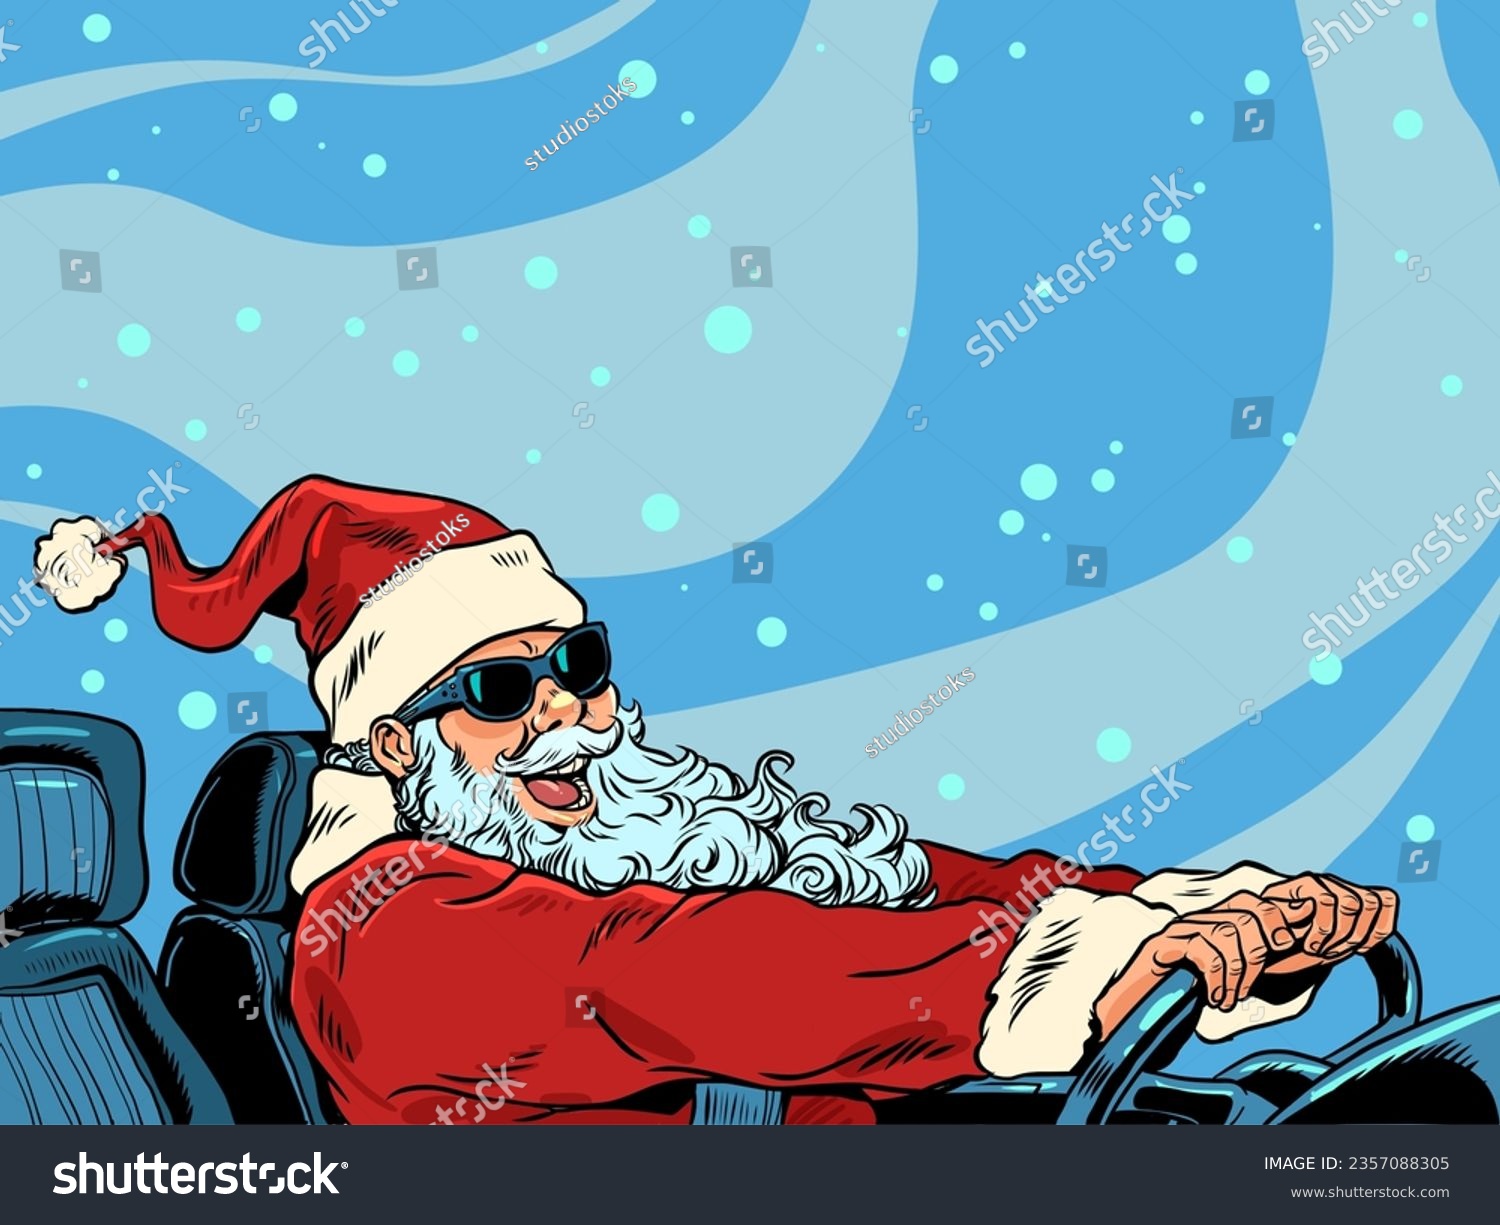 SVG of santa claus christmas The New Year is approaching customers, the announcement of upcoming discounts and promotions in stores. Seasonal shift and care of the car in the winter. Santa Claus driving a svg